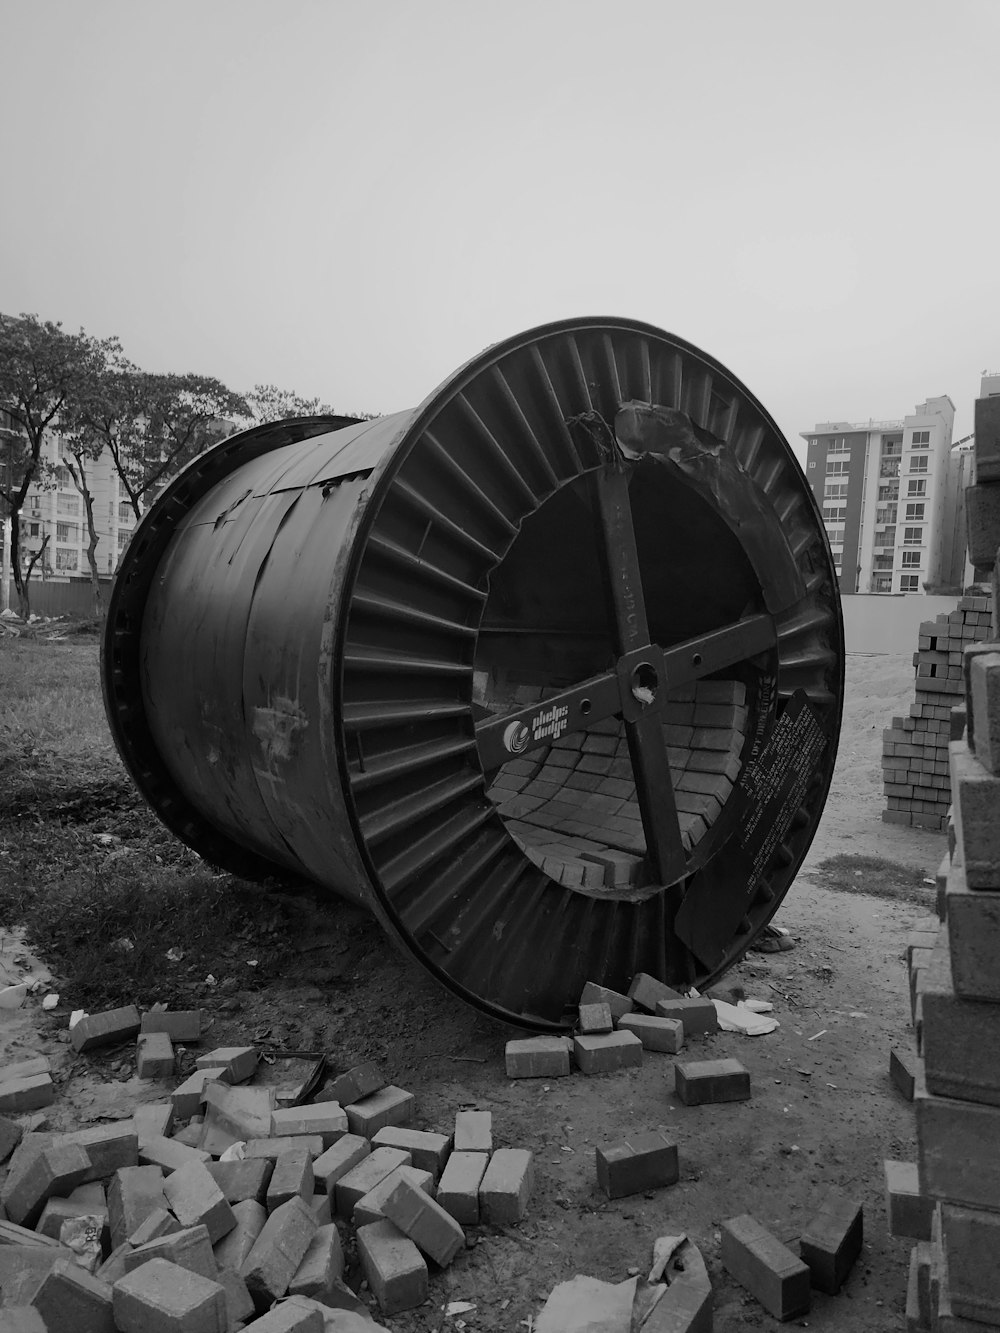 a large metal object sitting on top of a pile of bricks